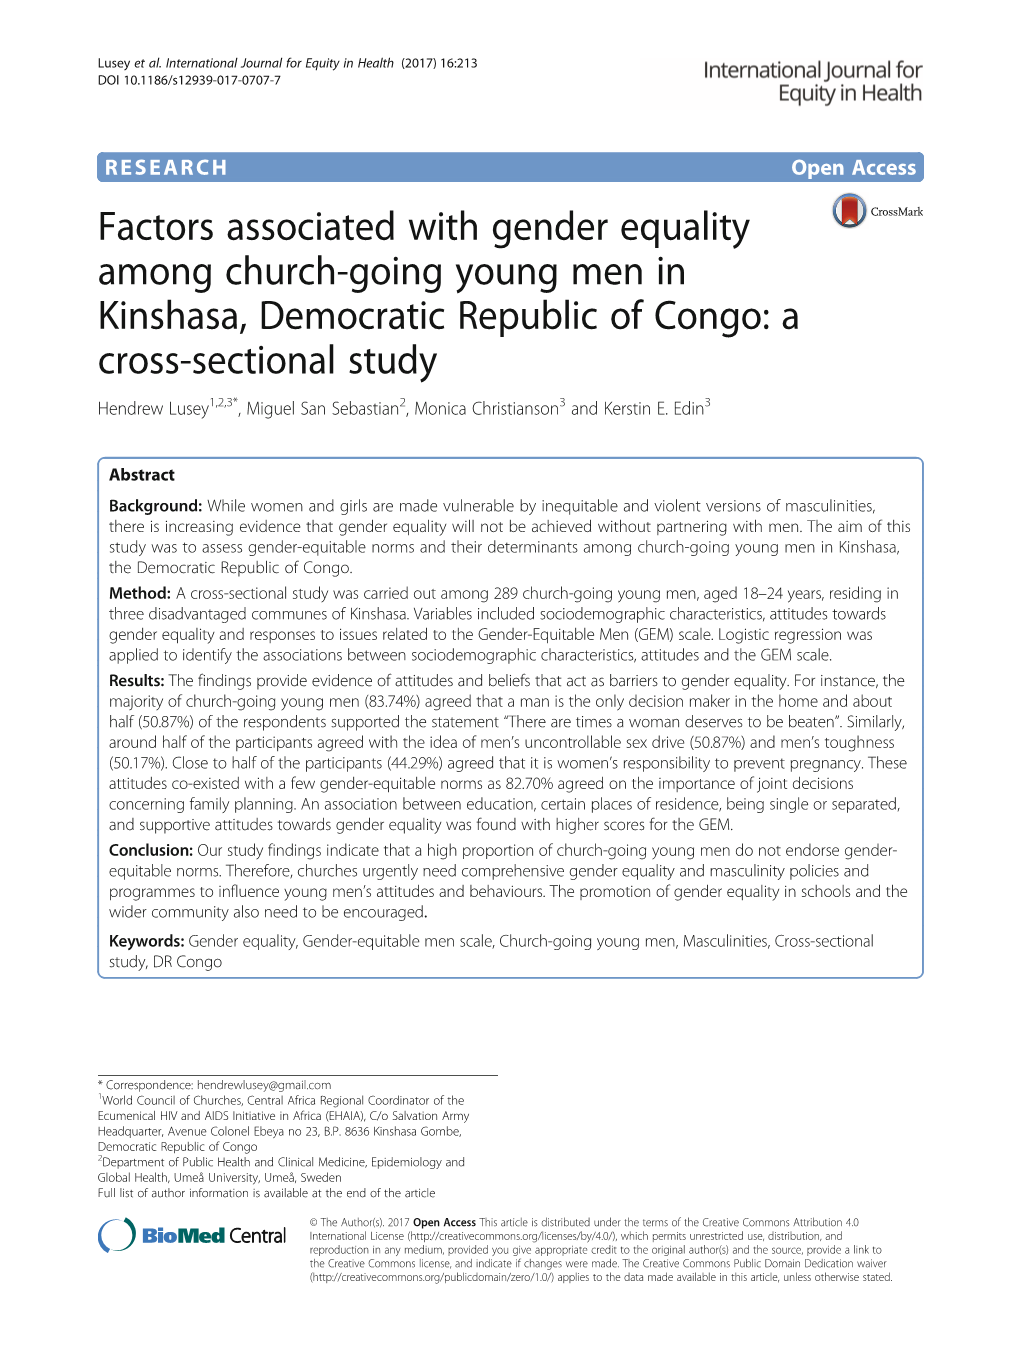 Factors Associated with Gender Equality Among Church-Going